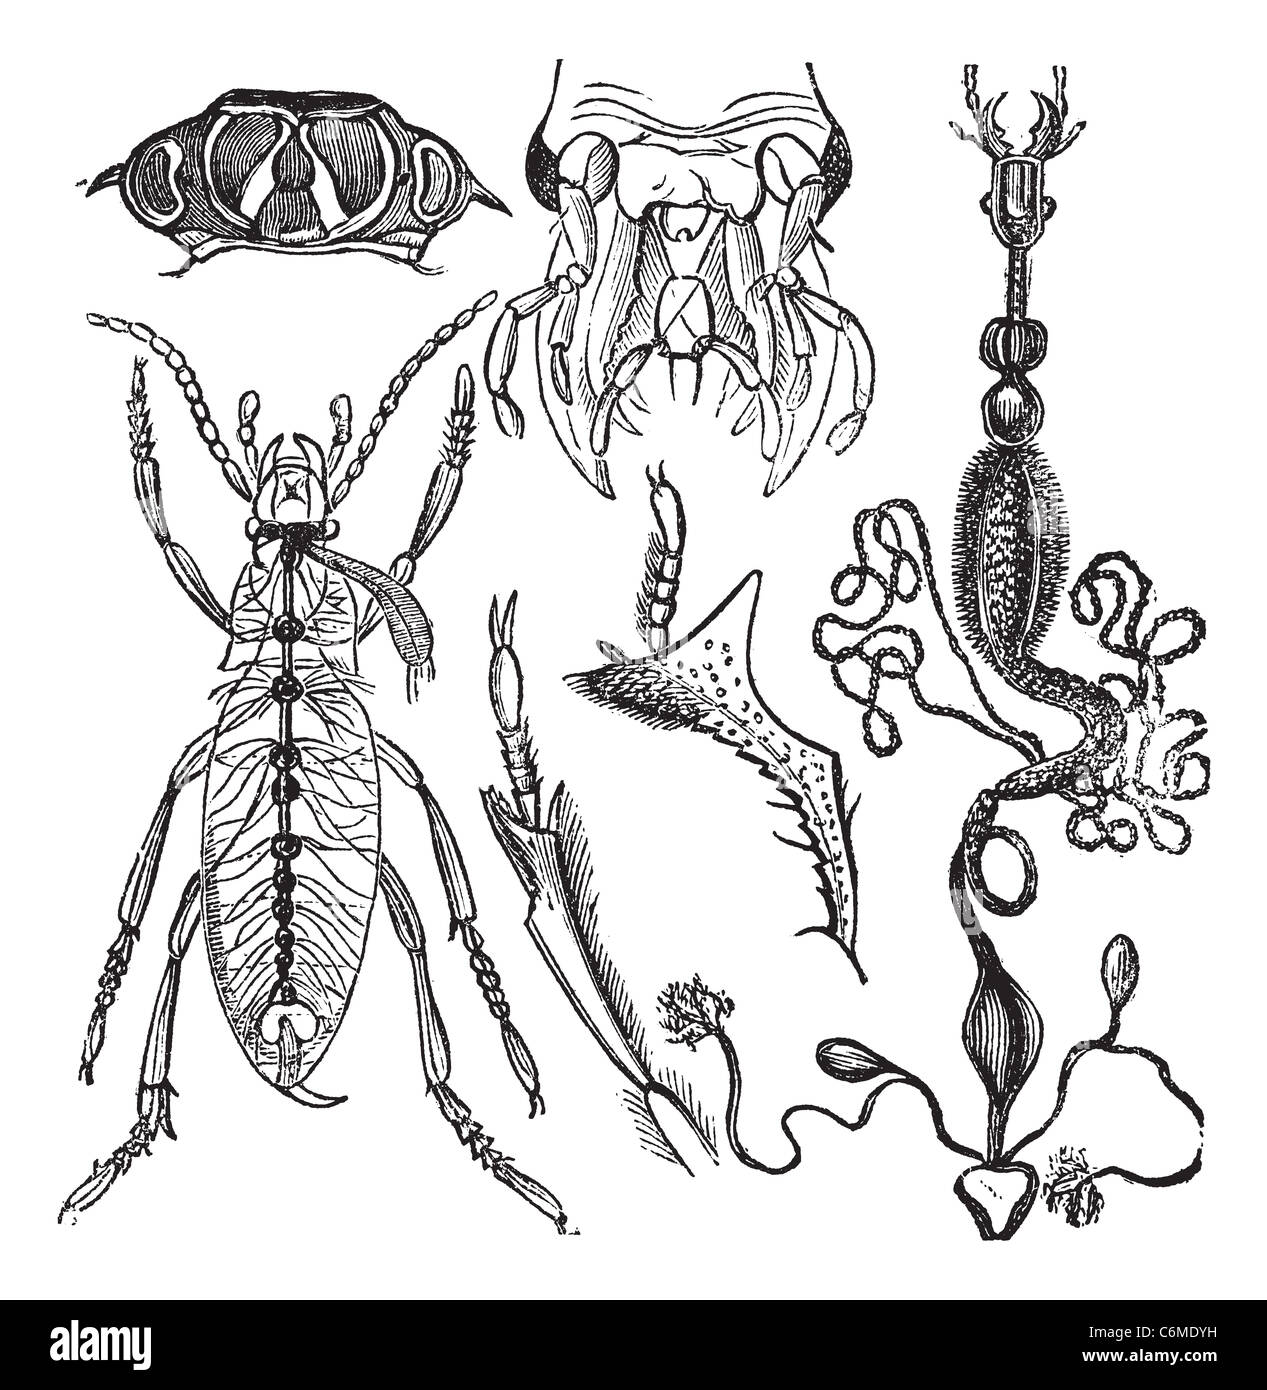 Coleopteres or French-Language Scientific Journal of Entomology, vintage engraving. Old engraved illustration of various parts Stock Photo